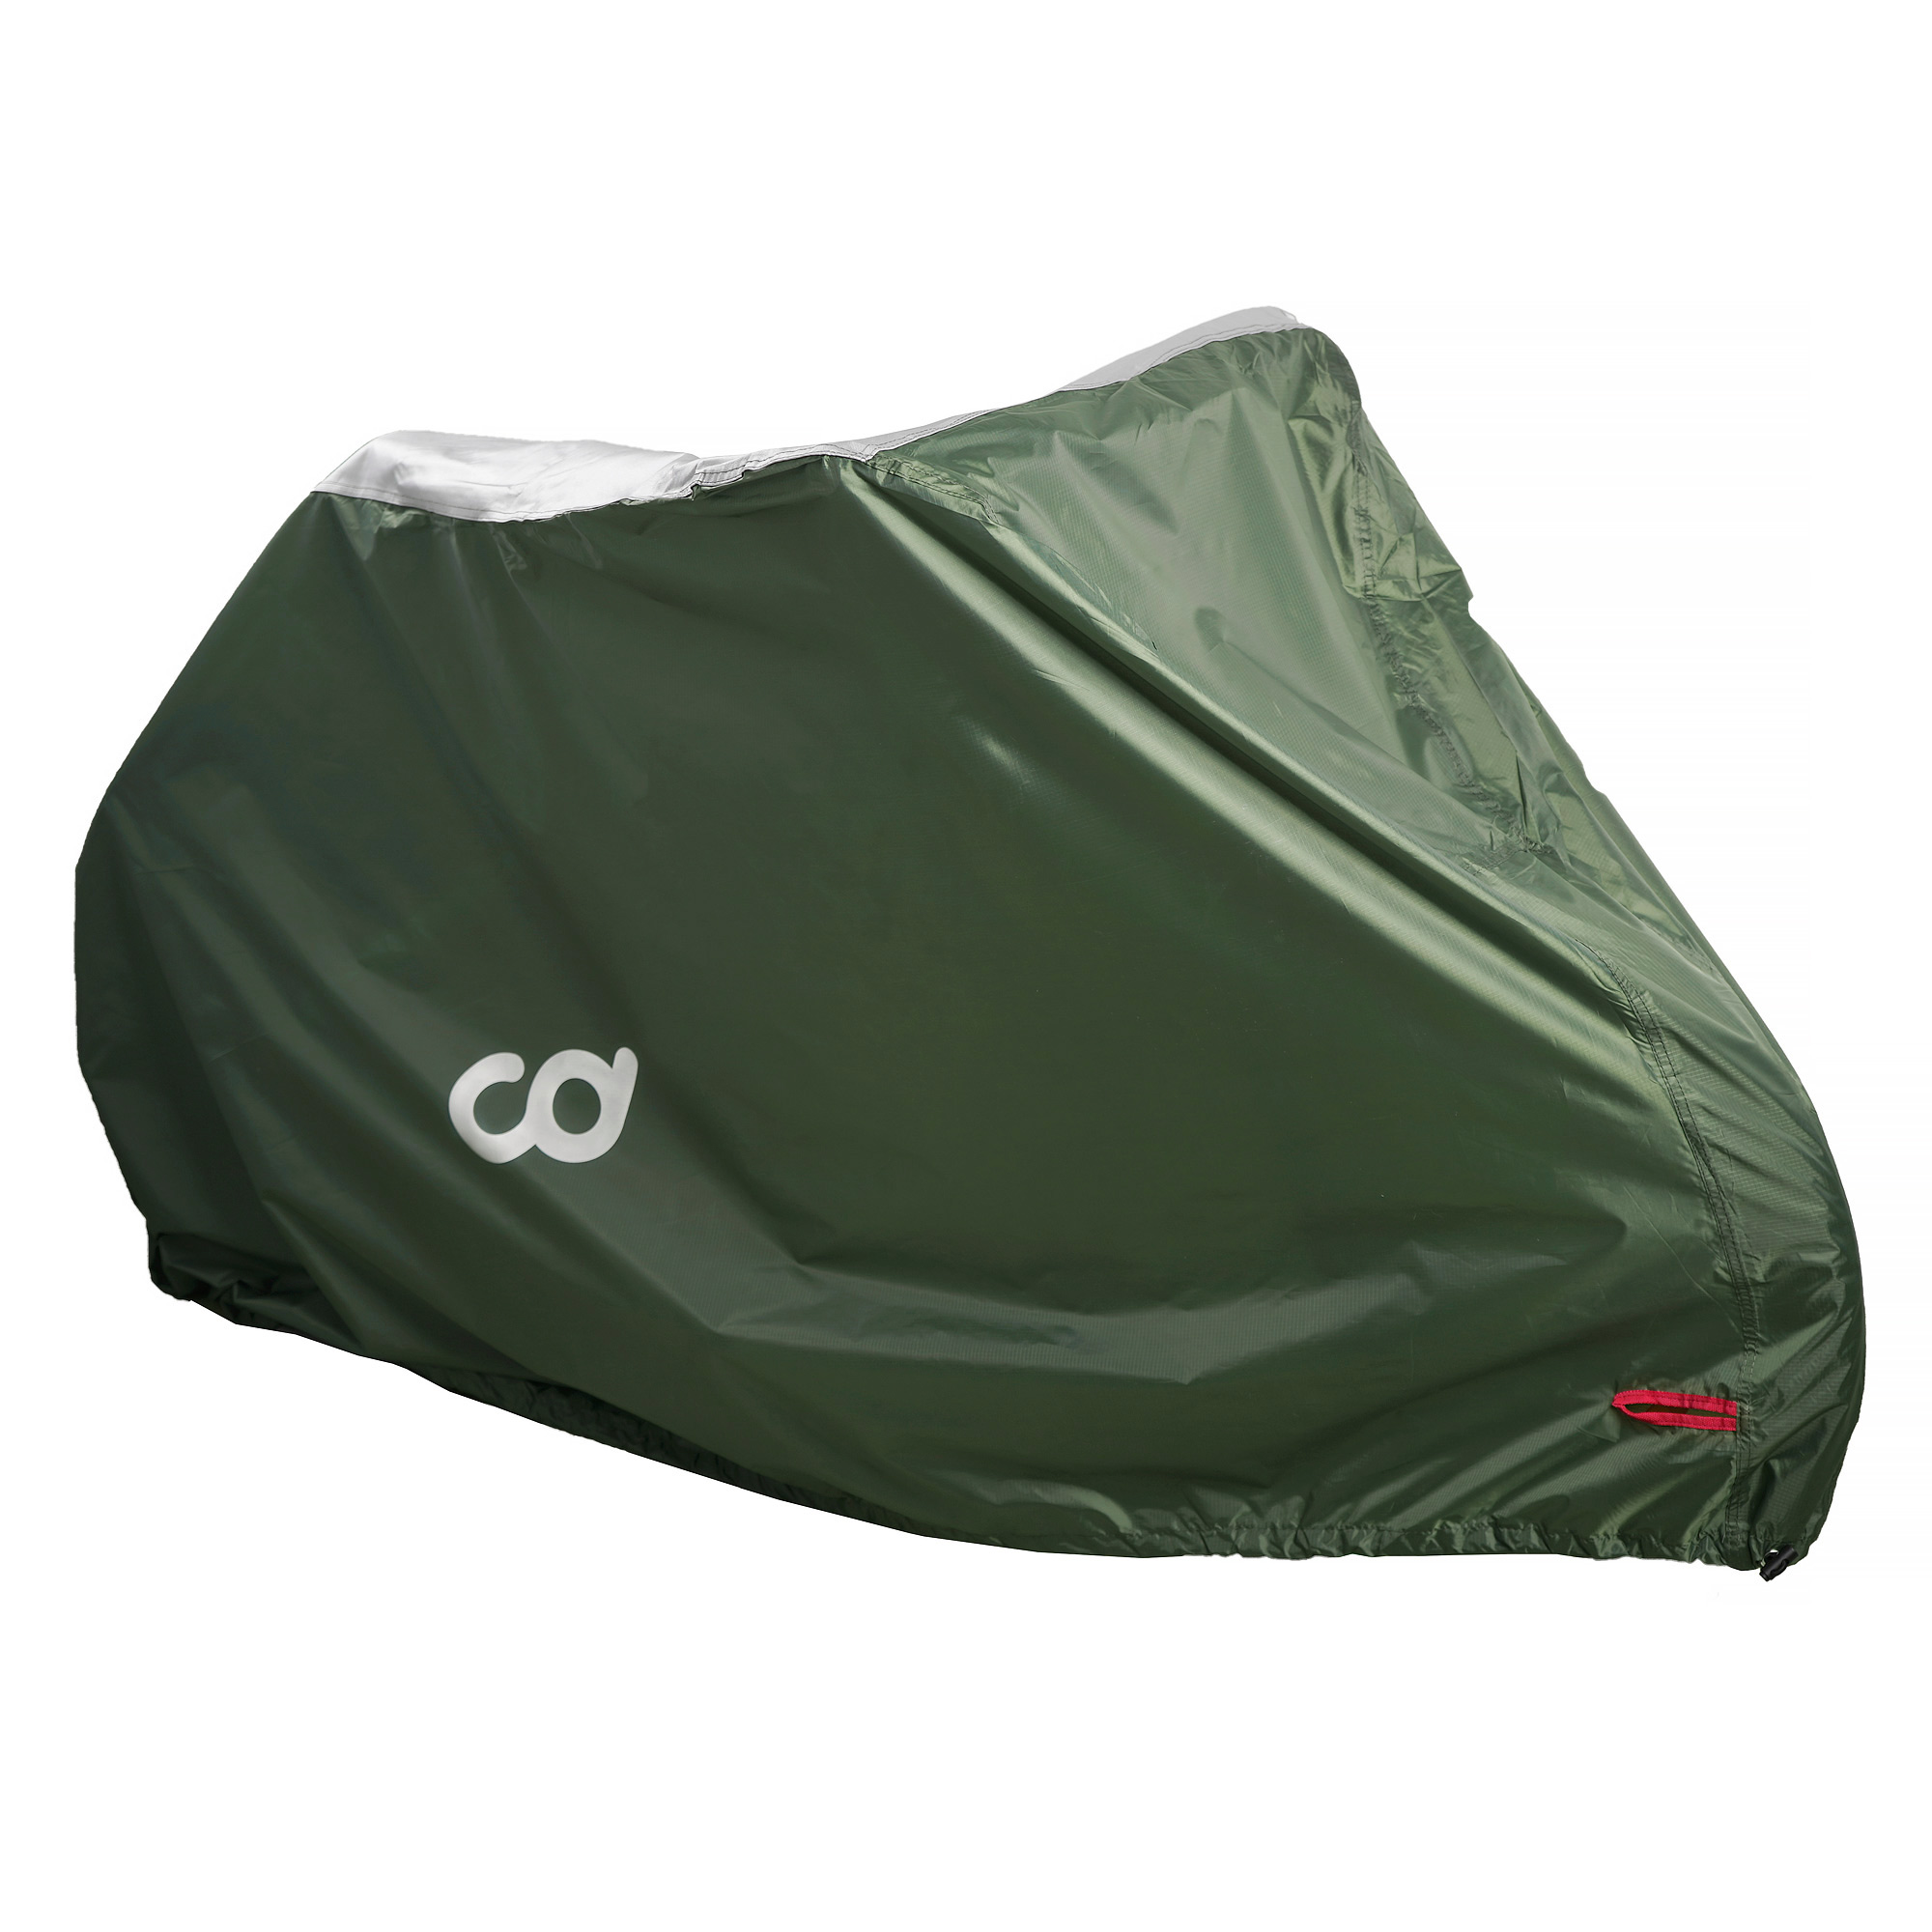 CD Bike Cover for Outdoor Bicycle Storage - 1 Bike - Heavy Duty 600D Oxford Fabric Waterproof Top 190T Polyest Material